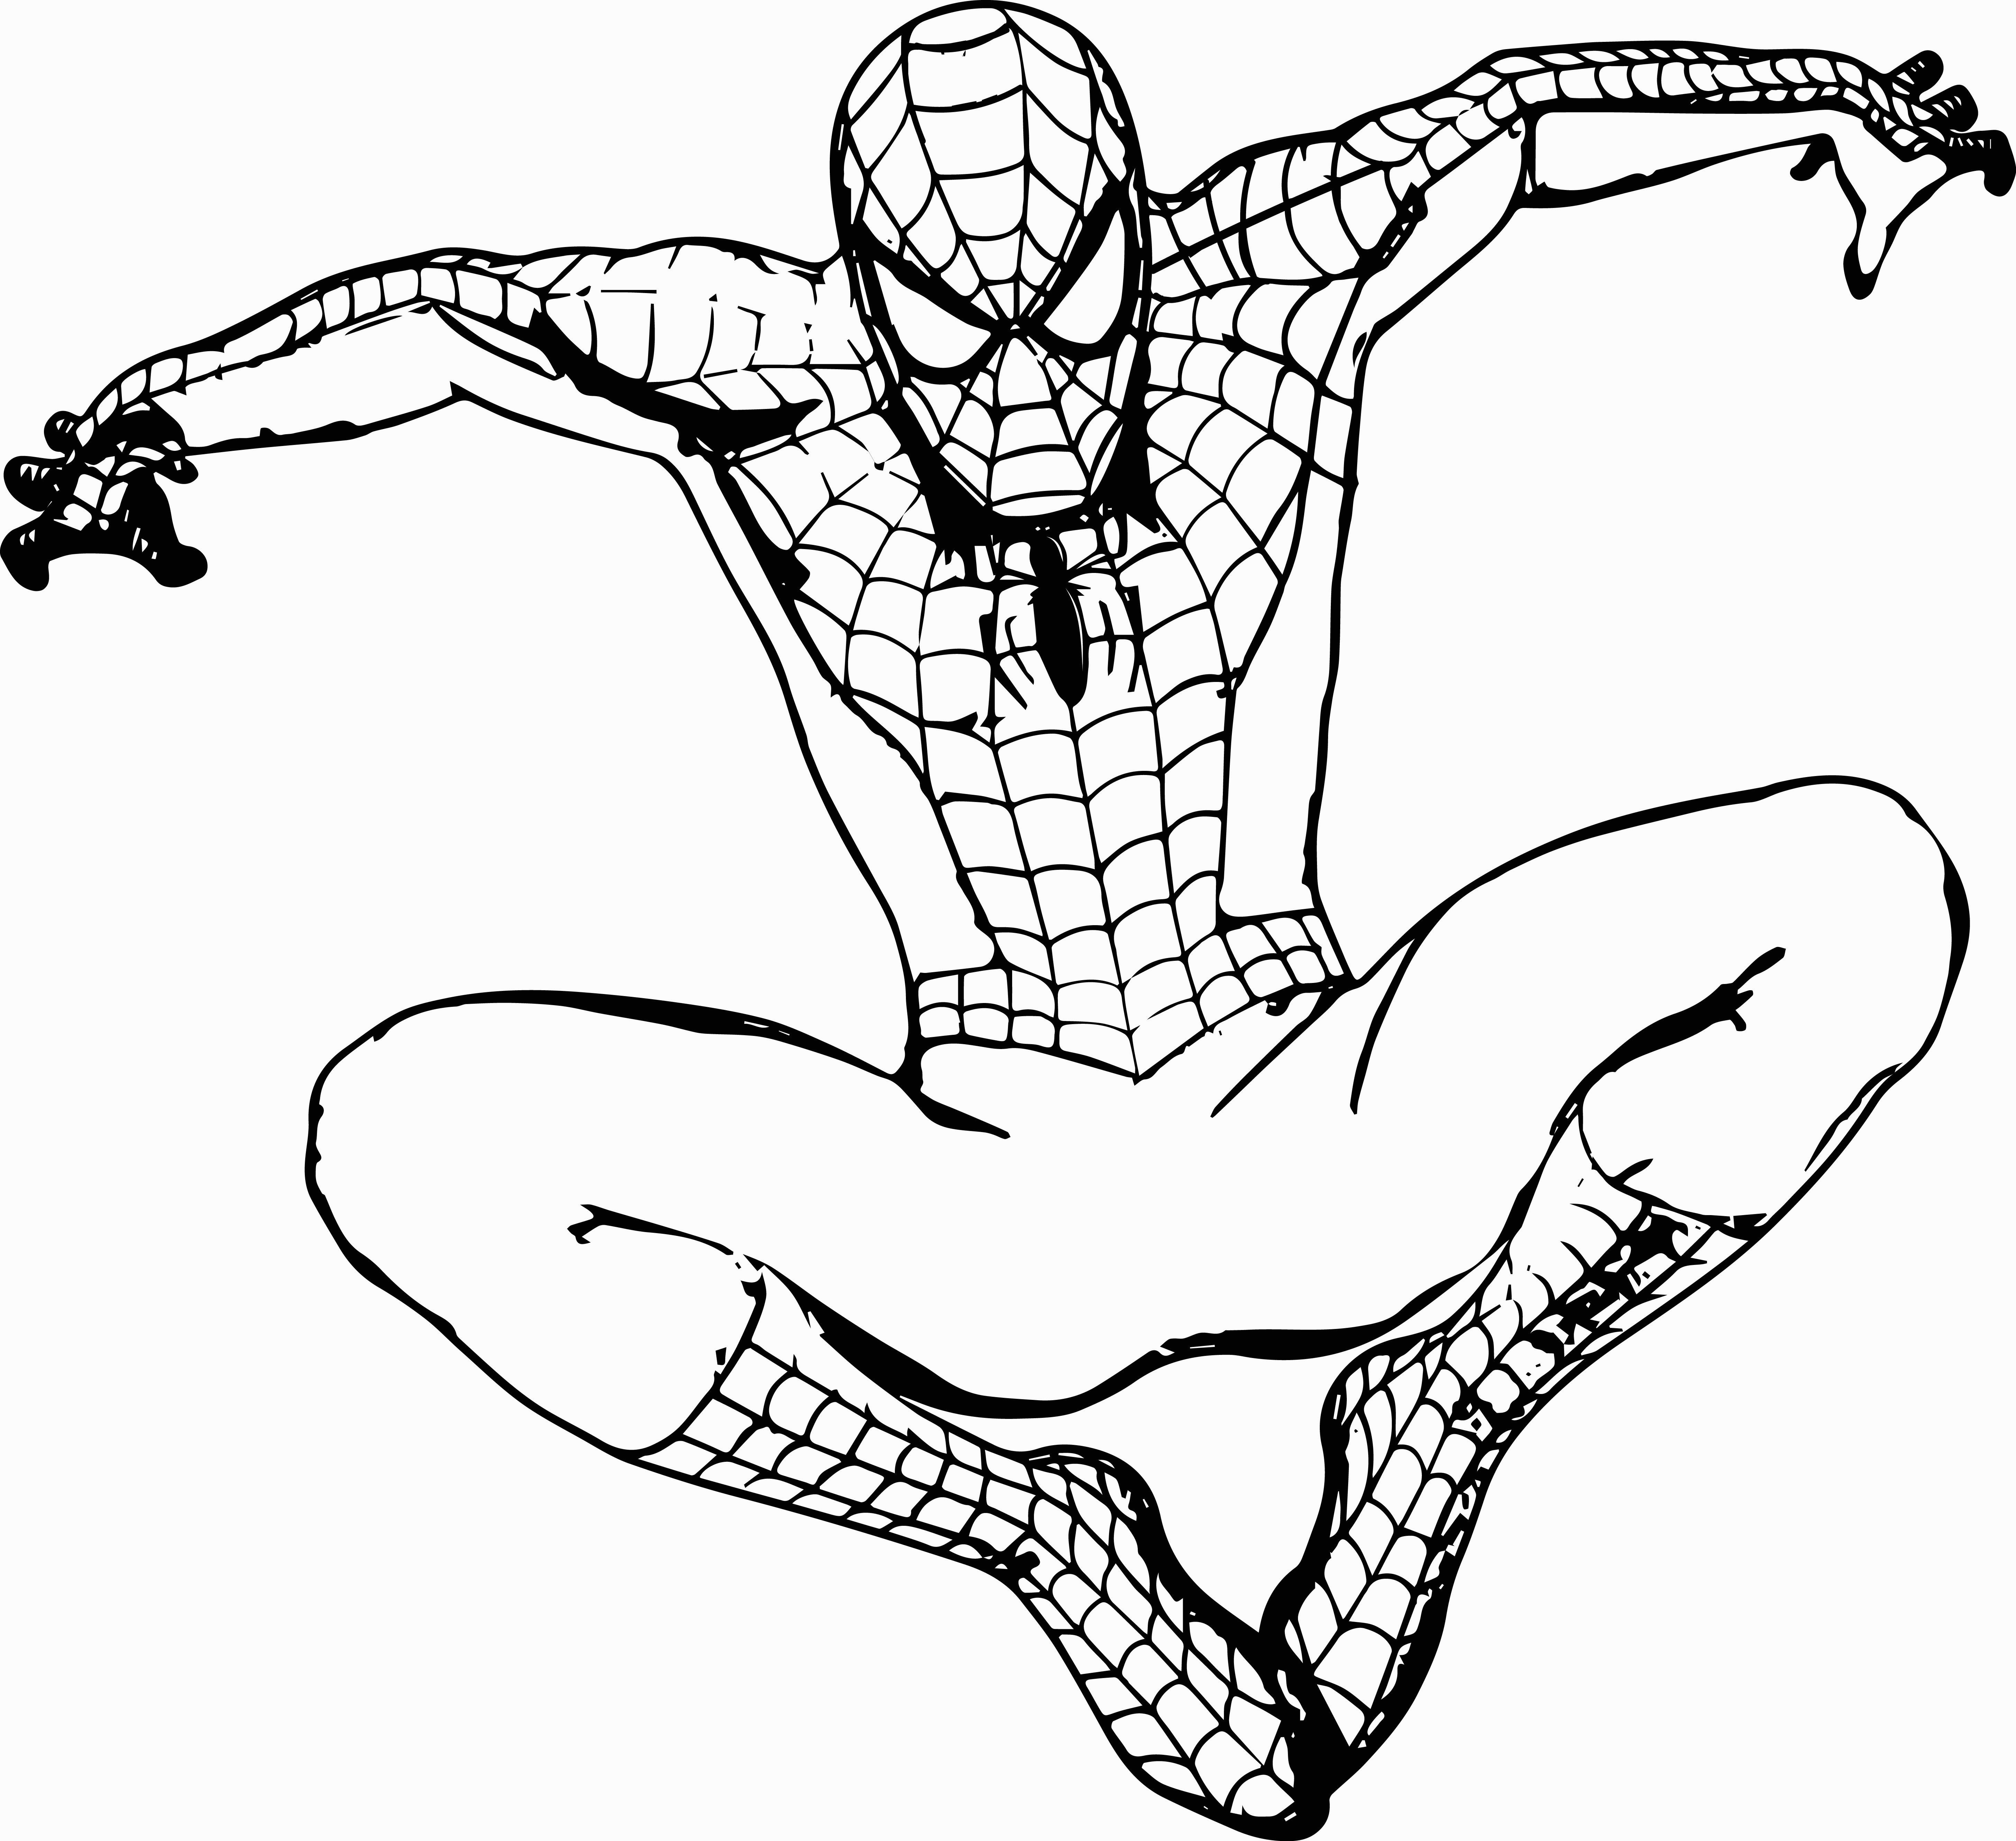 Free Printable Spiderman Images To Color Of Your Favorite | Coloring - Free Printable Spiderman Pictures